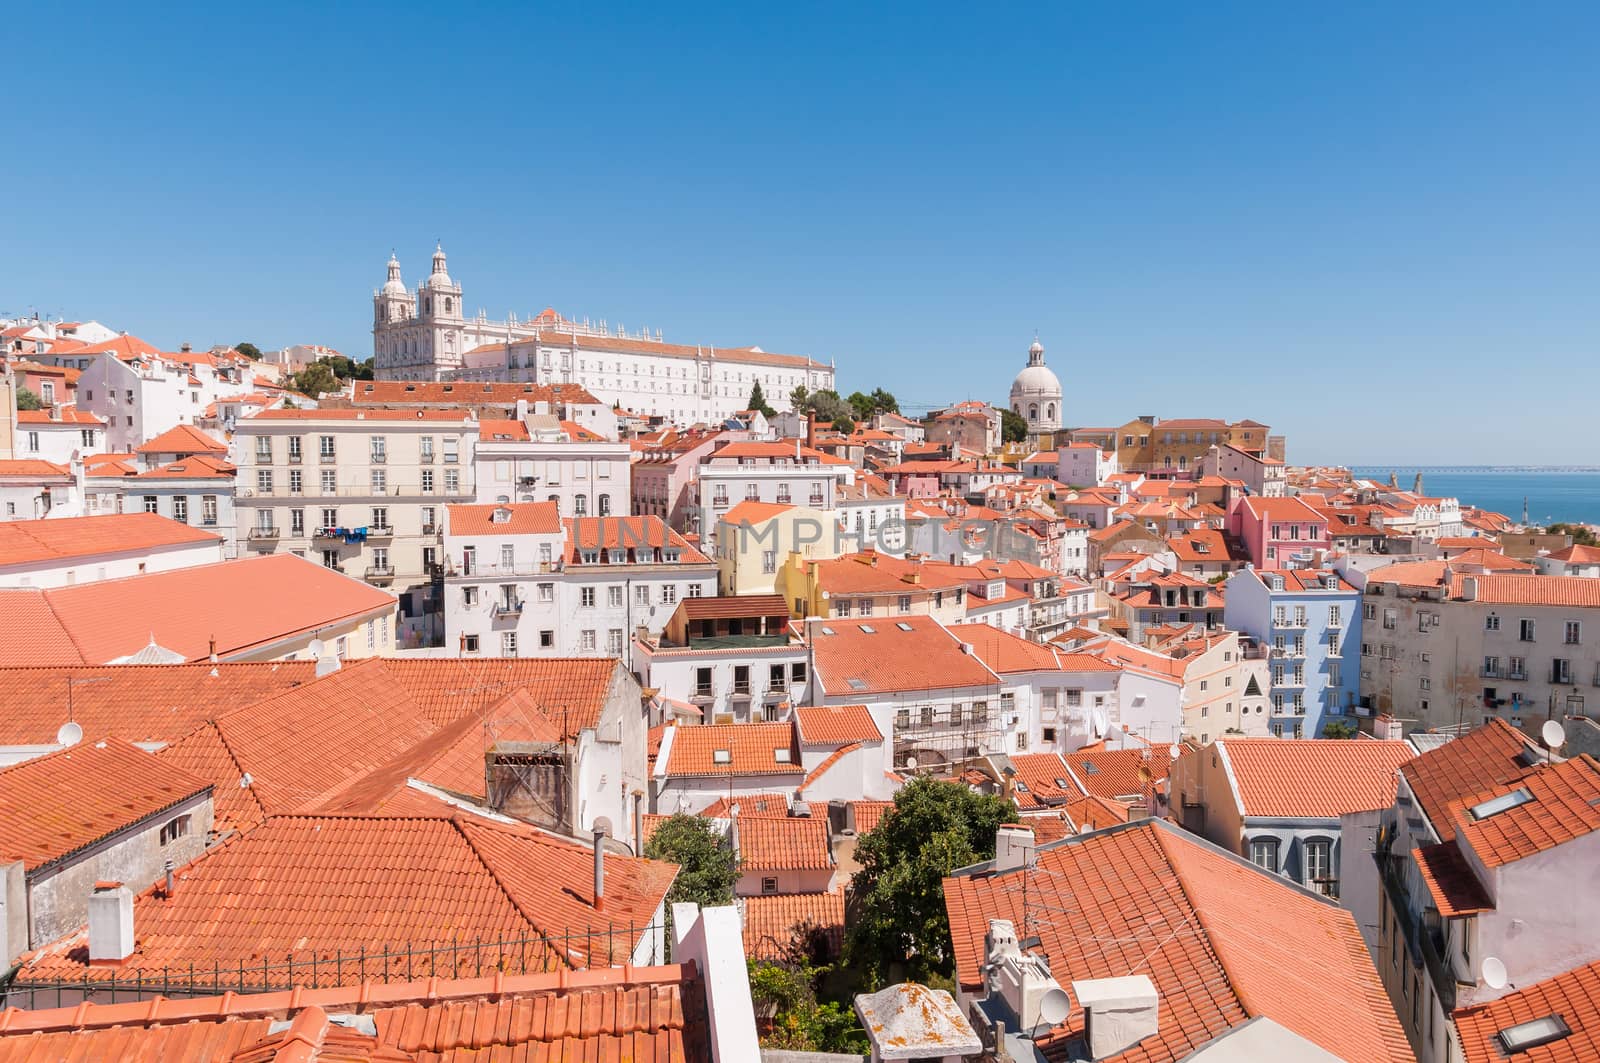 View of the Alfama district in Lisbon, Portugal